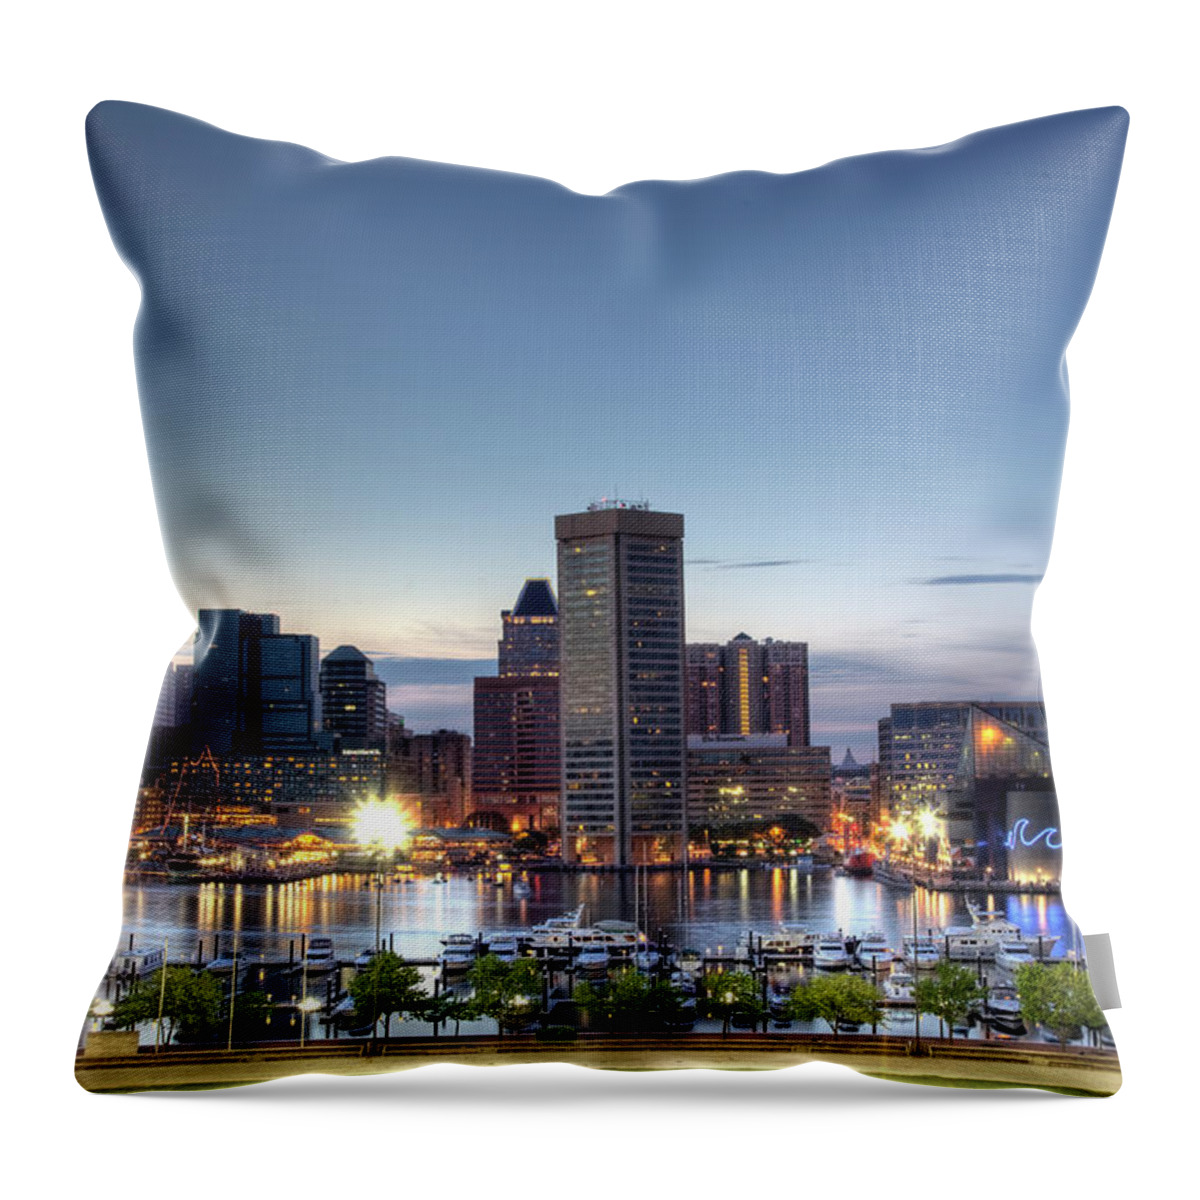 Baltimore Throw Pillow featuring the photograph Baltimore Harbor by Shawn Everhart